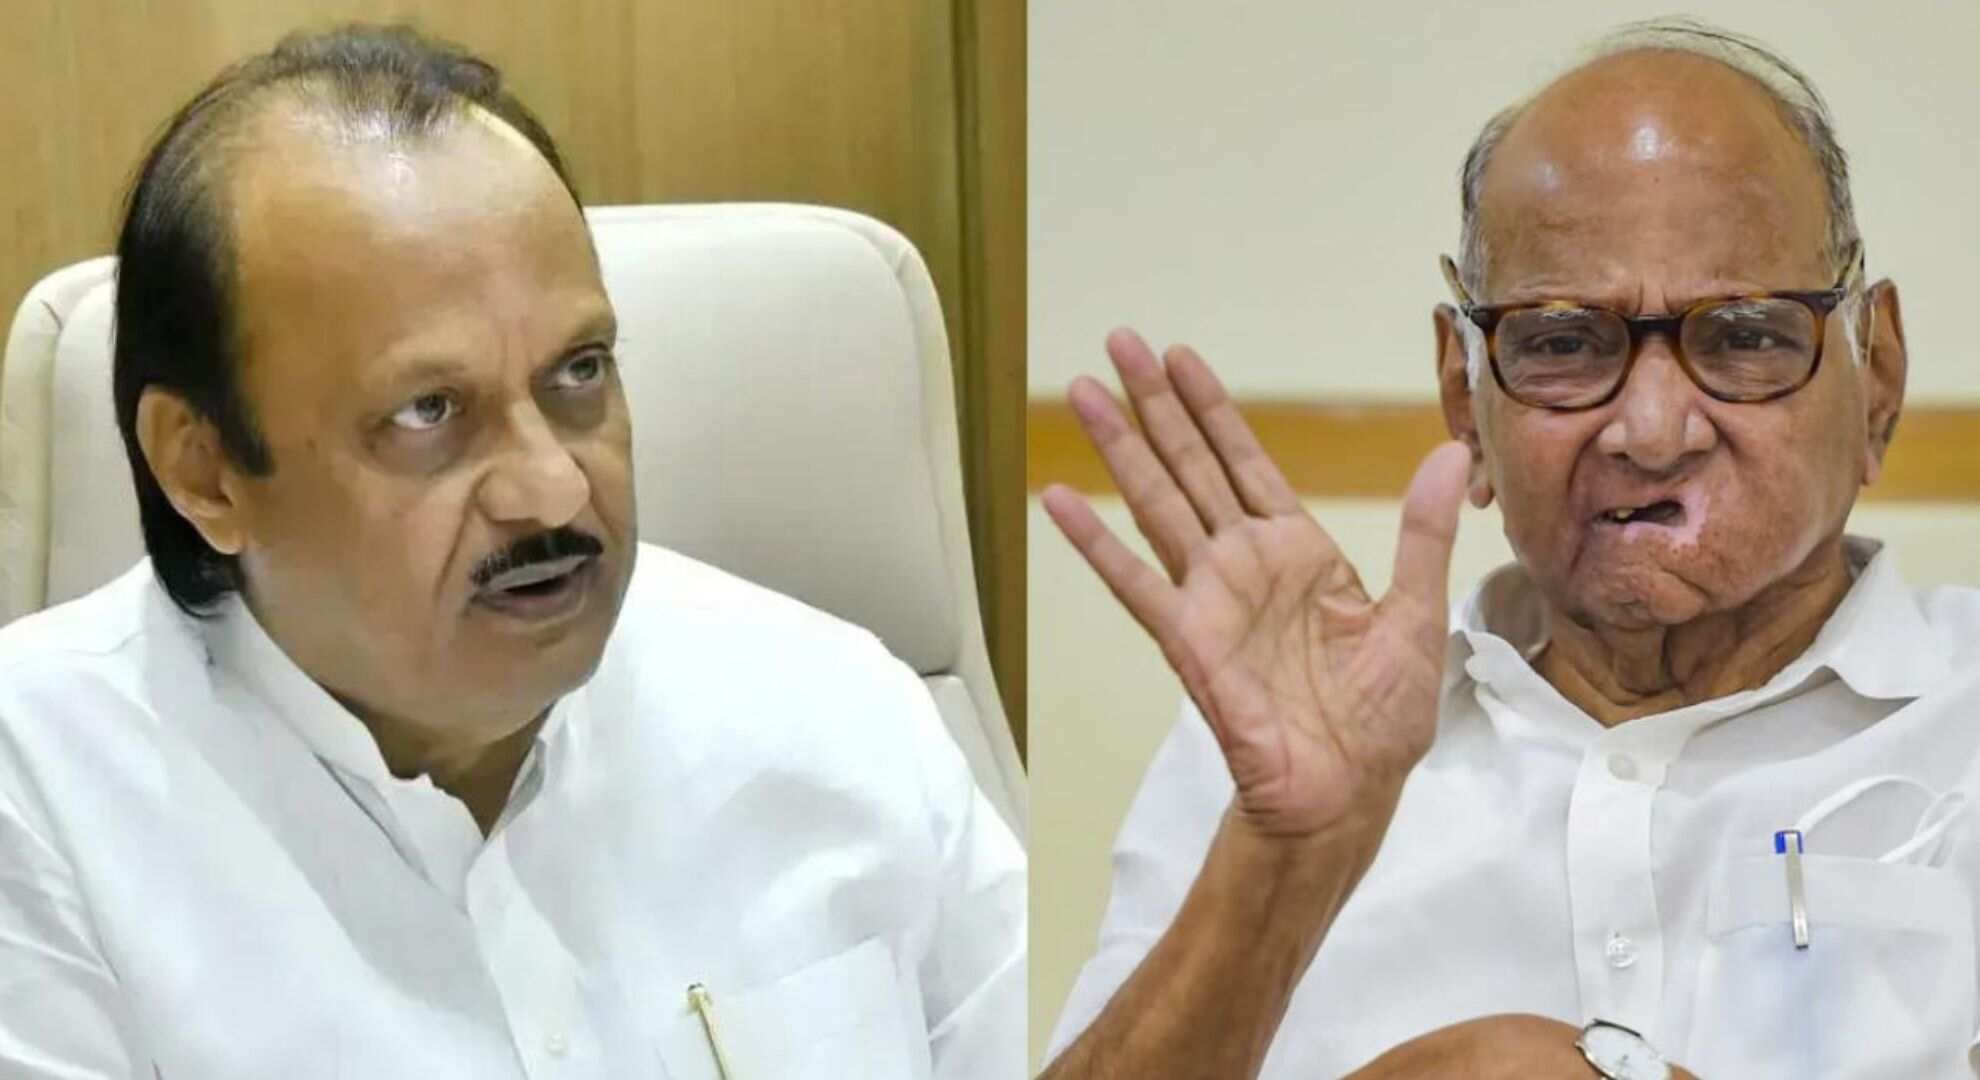 Sharad Pawar Considers Ajit Pawar’s Return to NCP Amid Political Changes